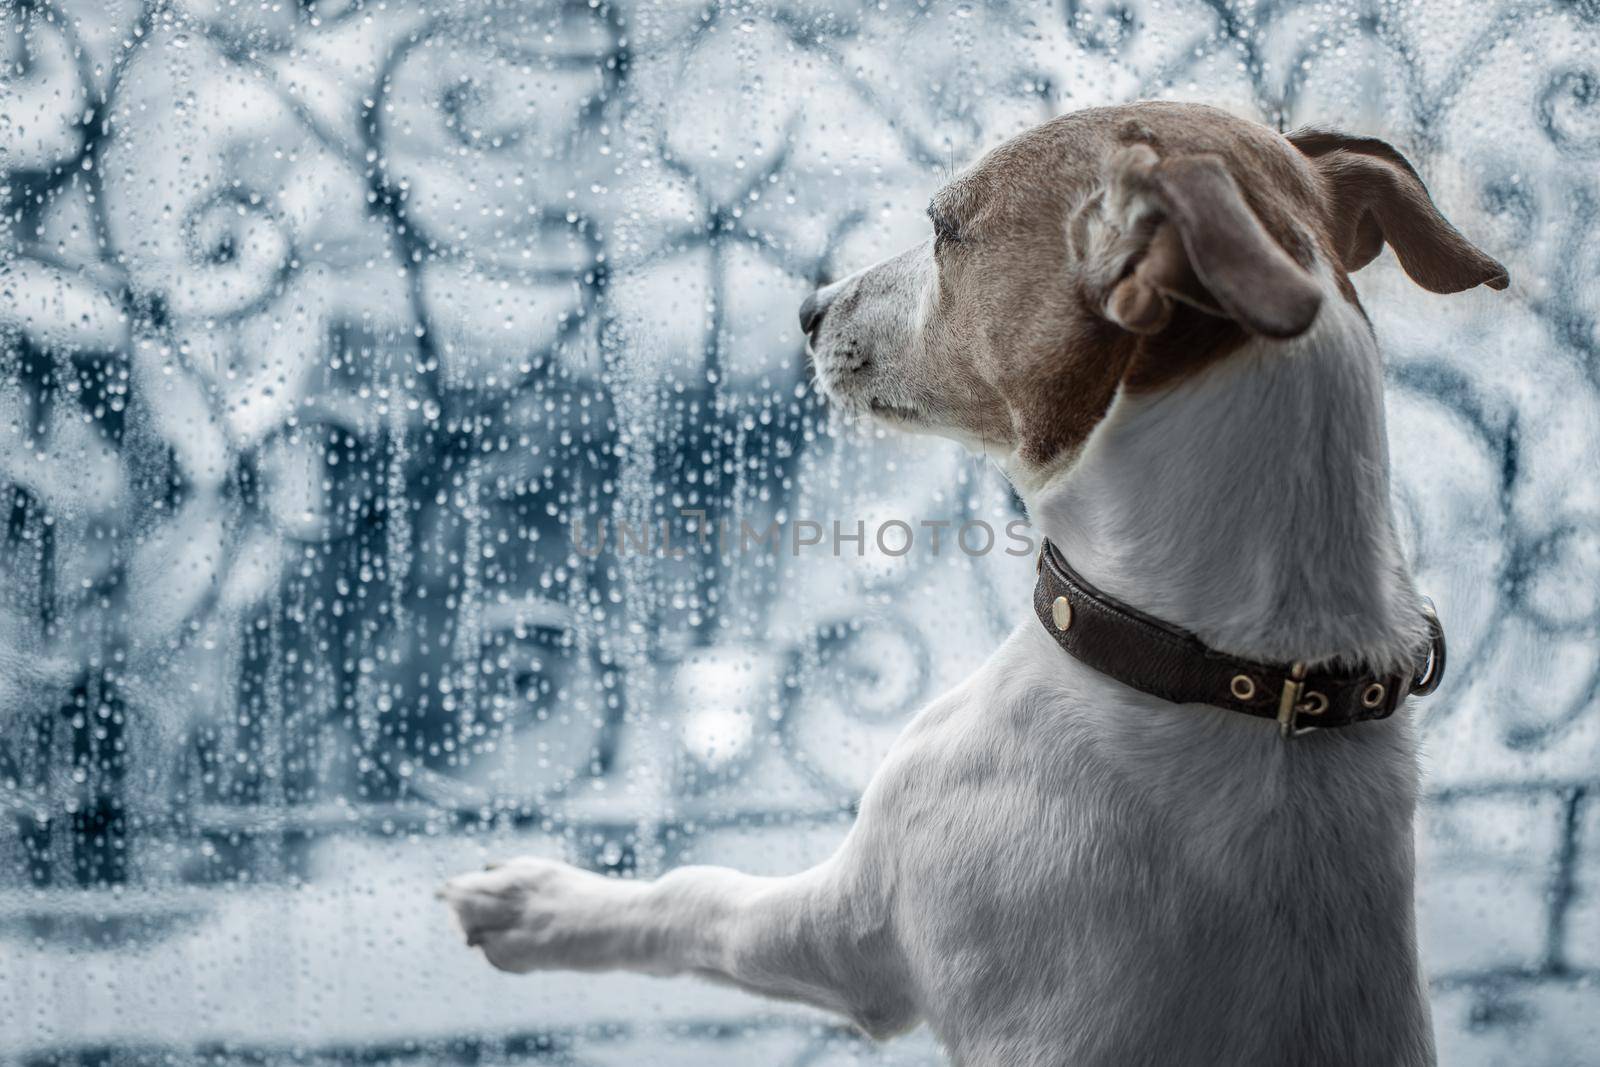 jack russel dog at window watching the bad and cold rain and rainy weather looking sad